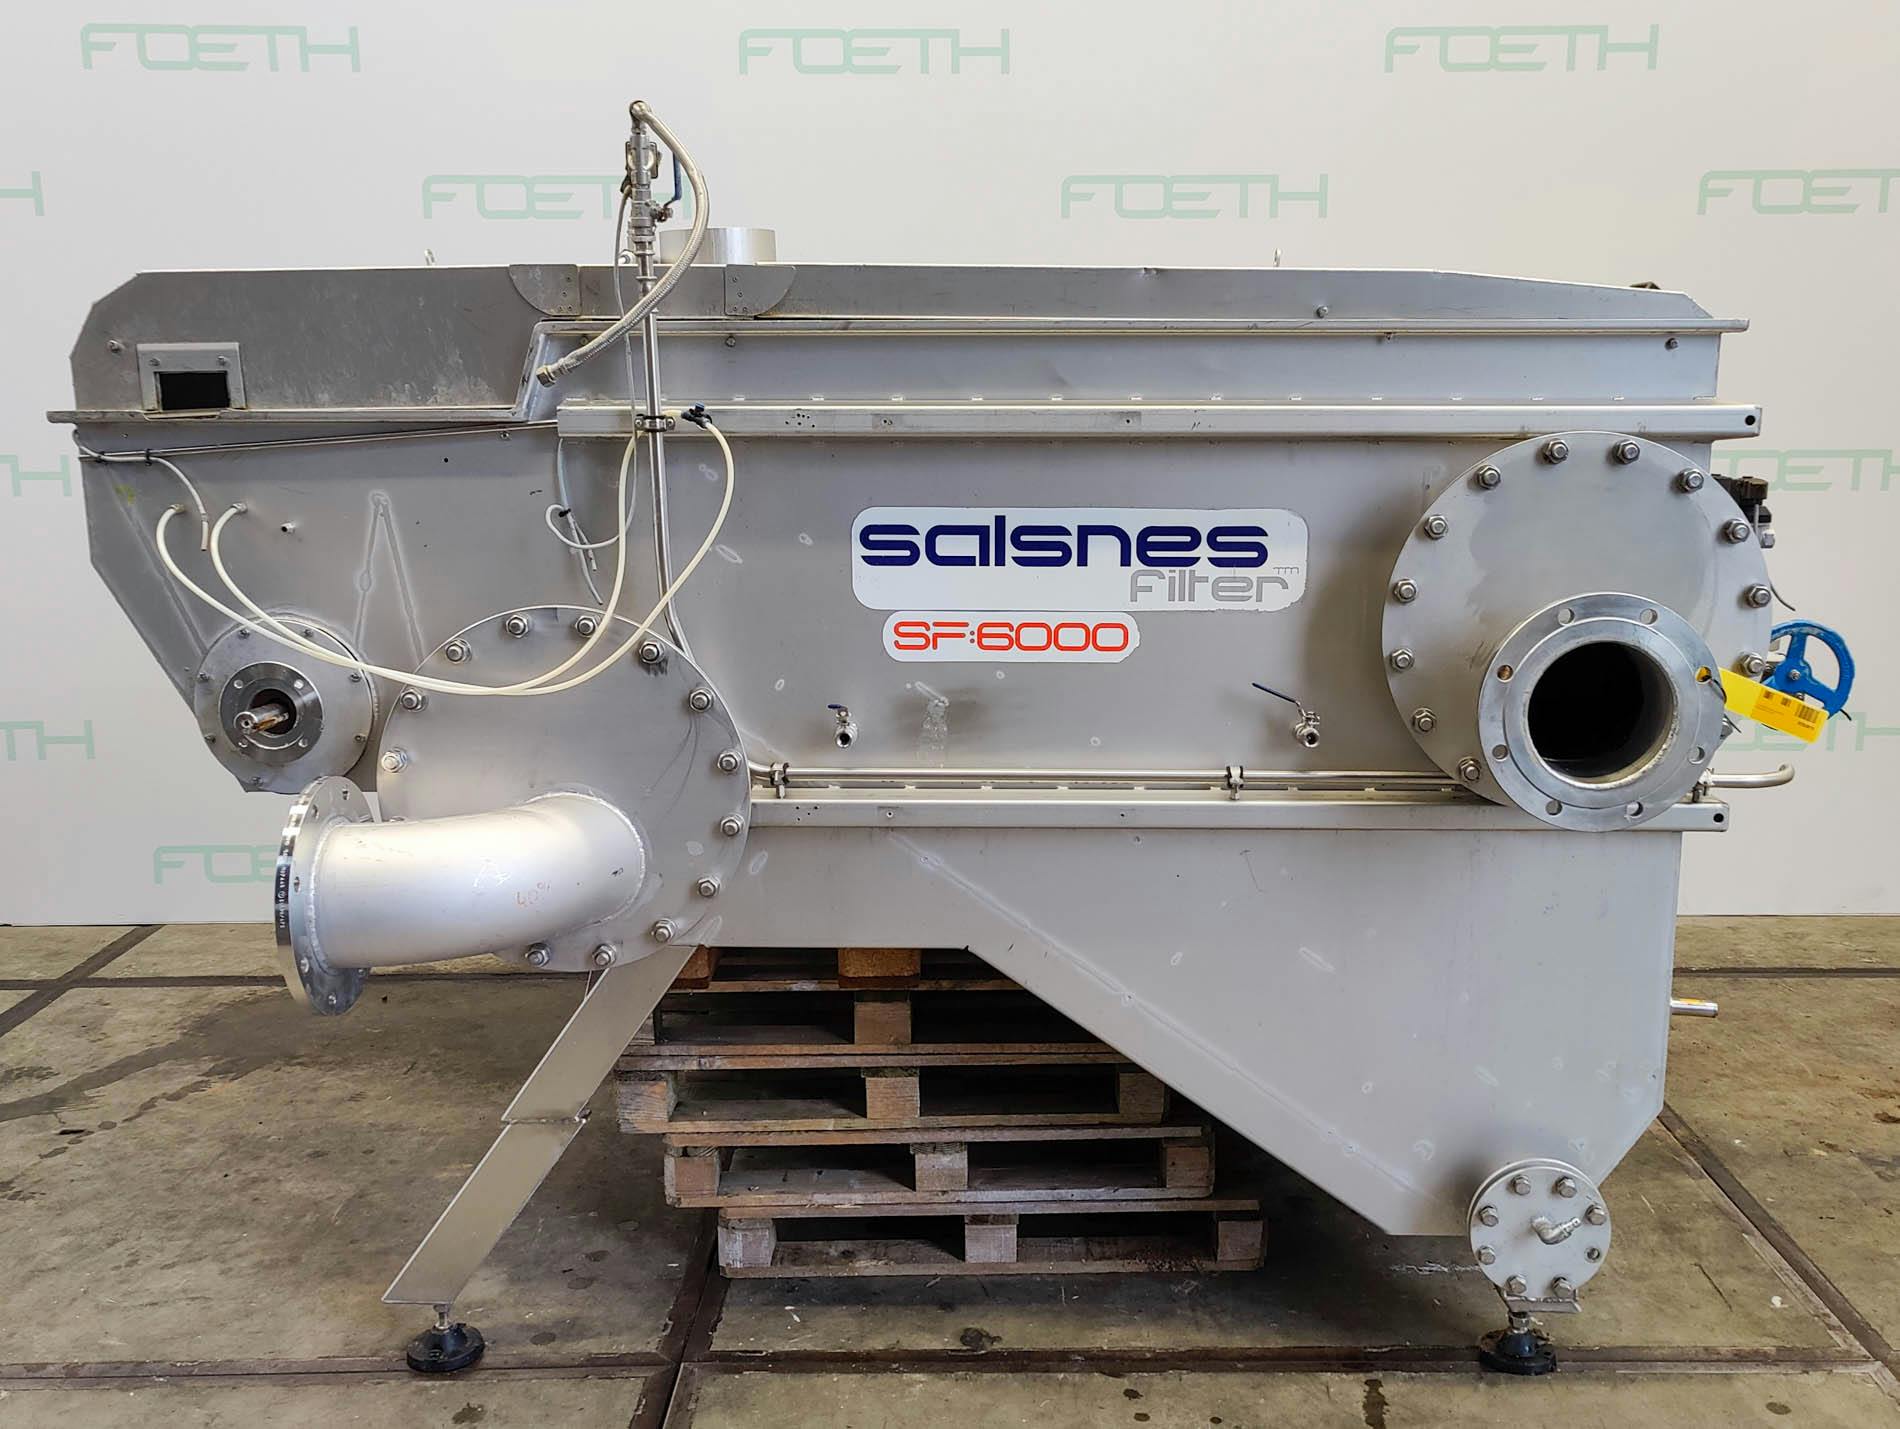 Salsnes 6000 "Solids Separation with Integrated Sludge Thickening and Dewatering" - Filtr - image 1